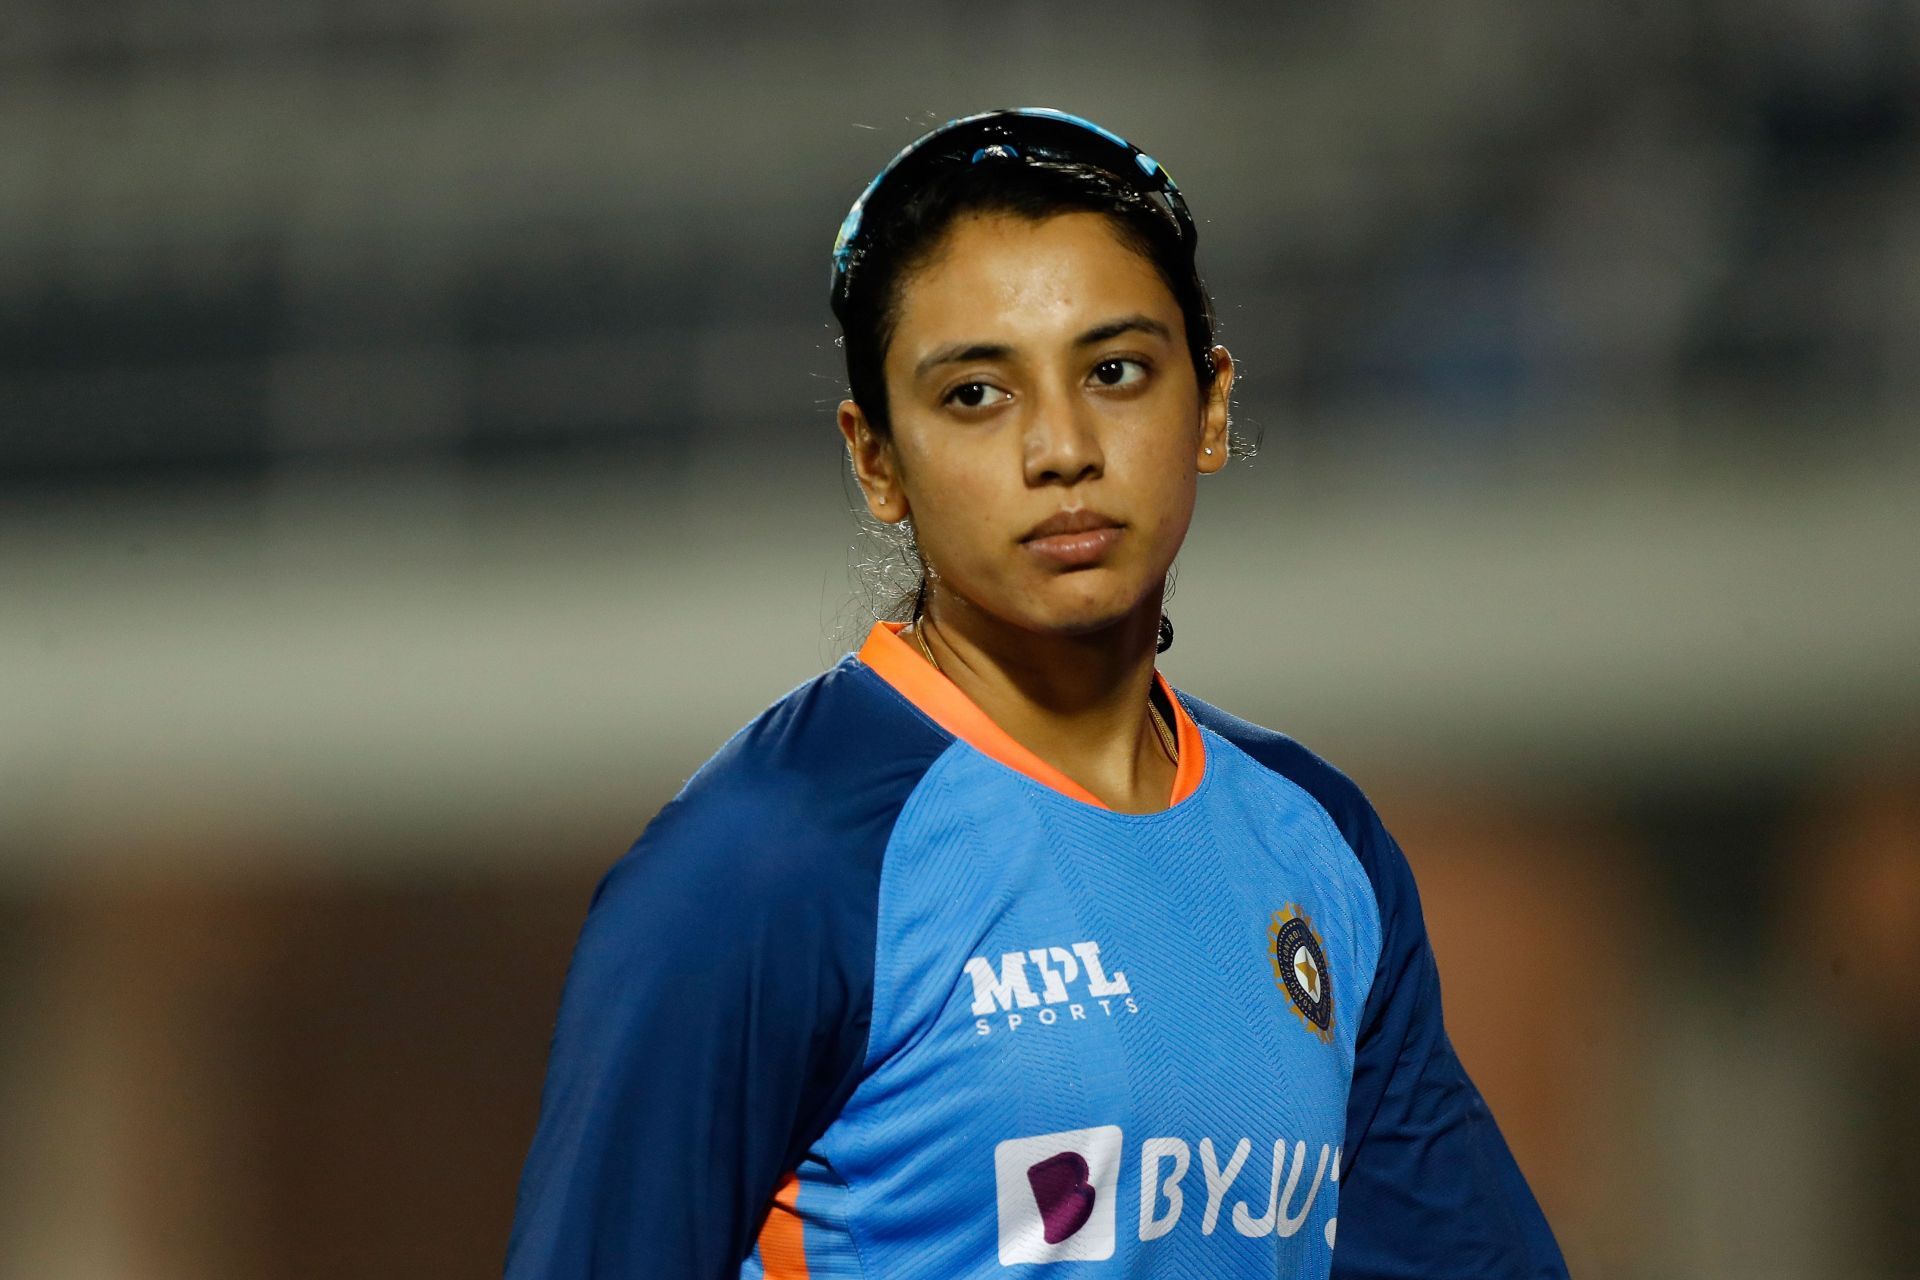 Smriti Mandhana has been in sublime form